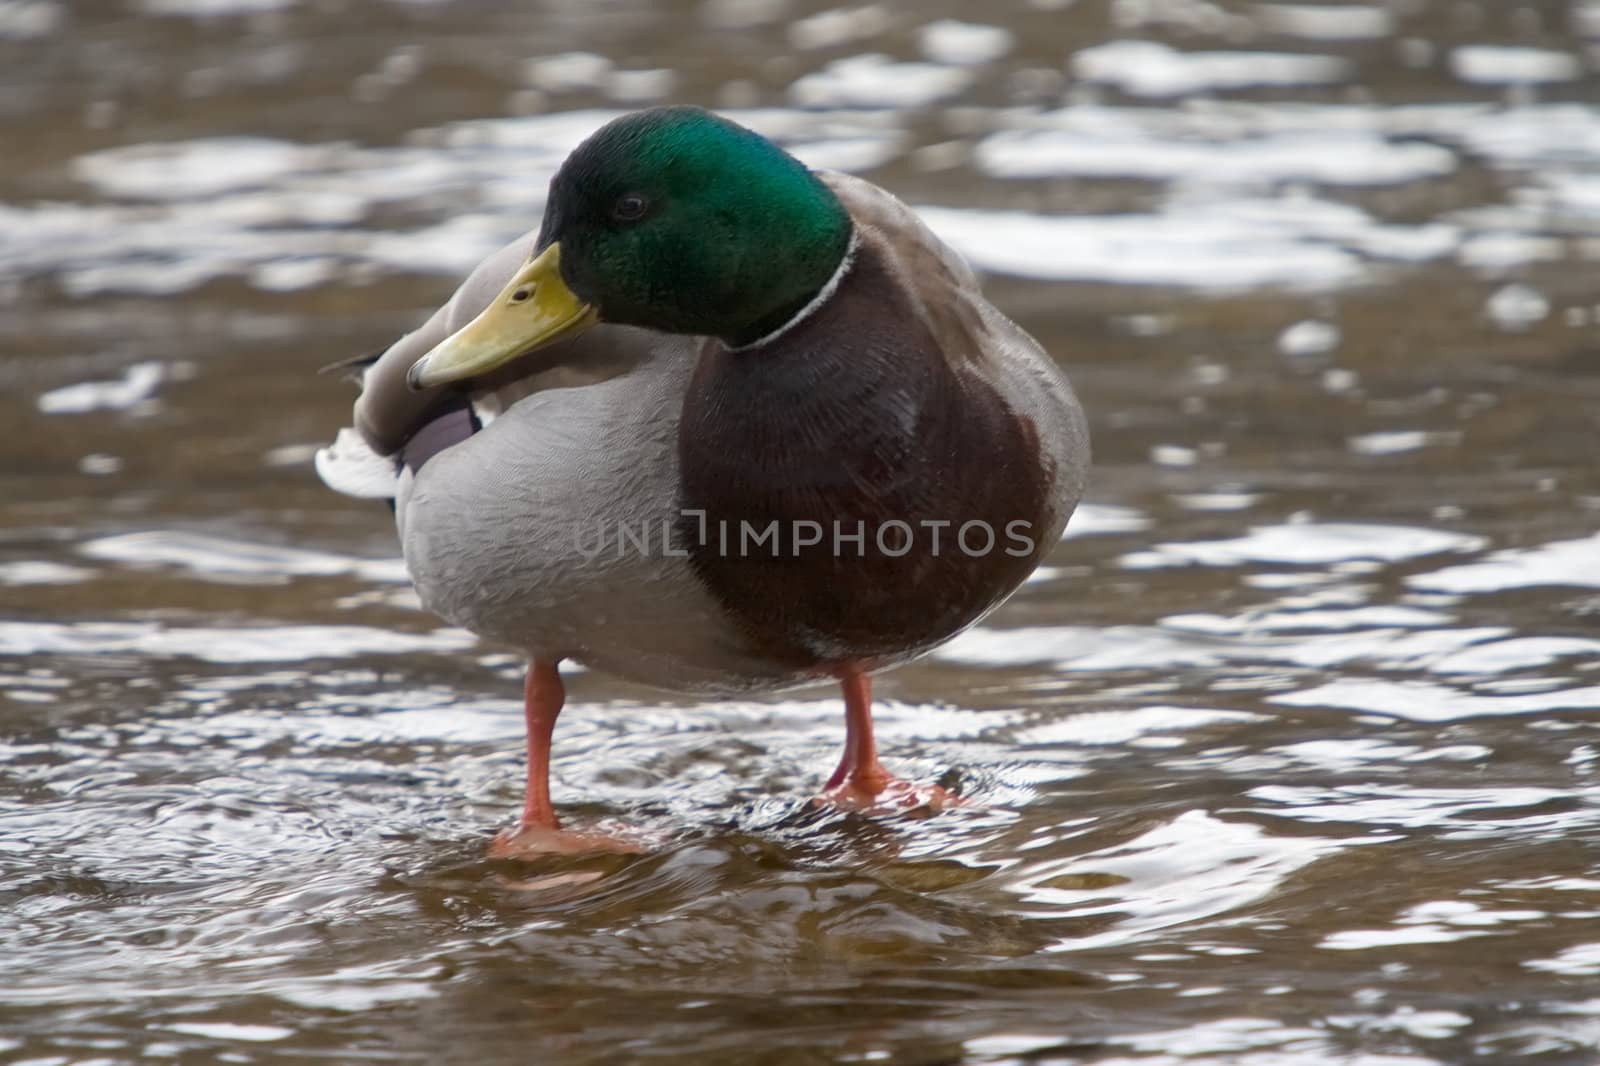 A duck standing in water, looking about.